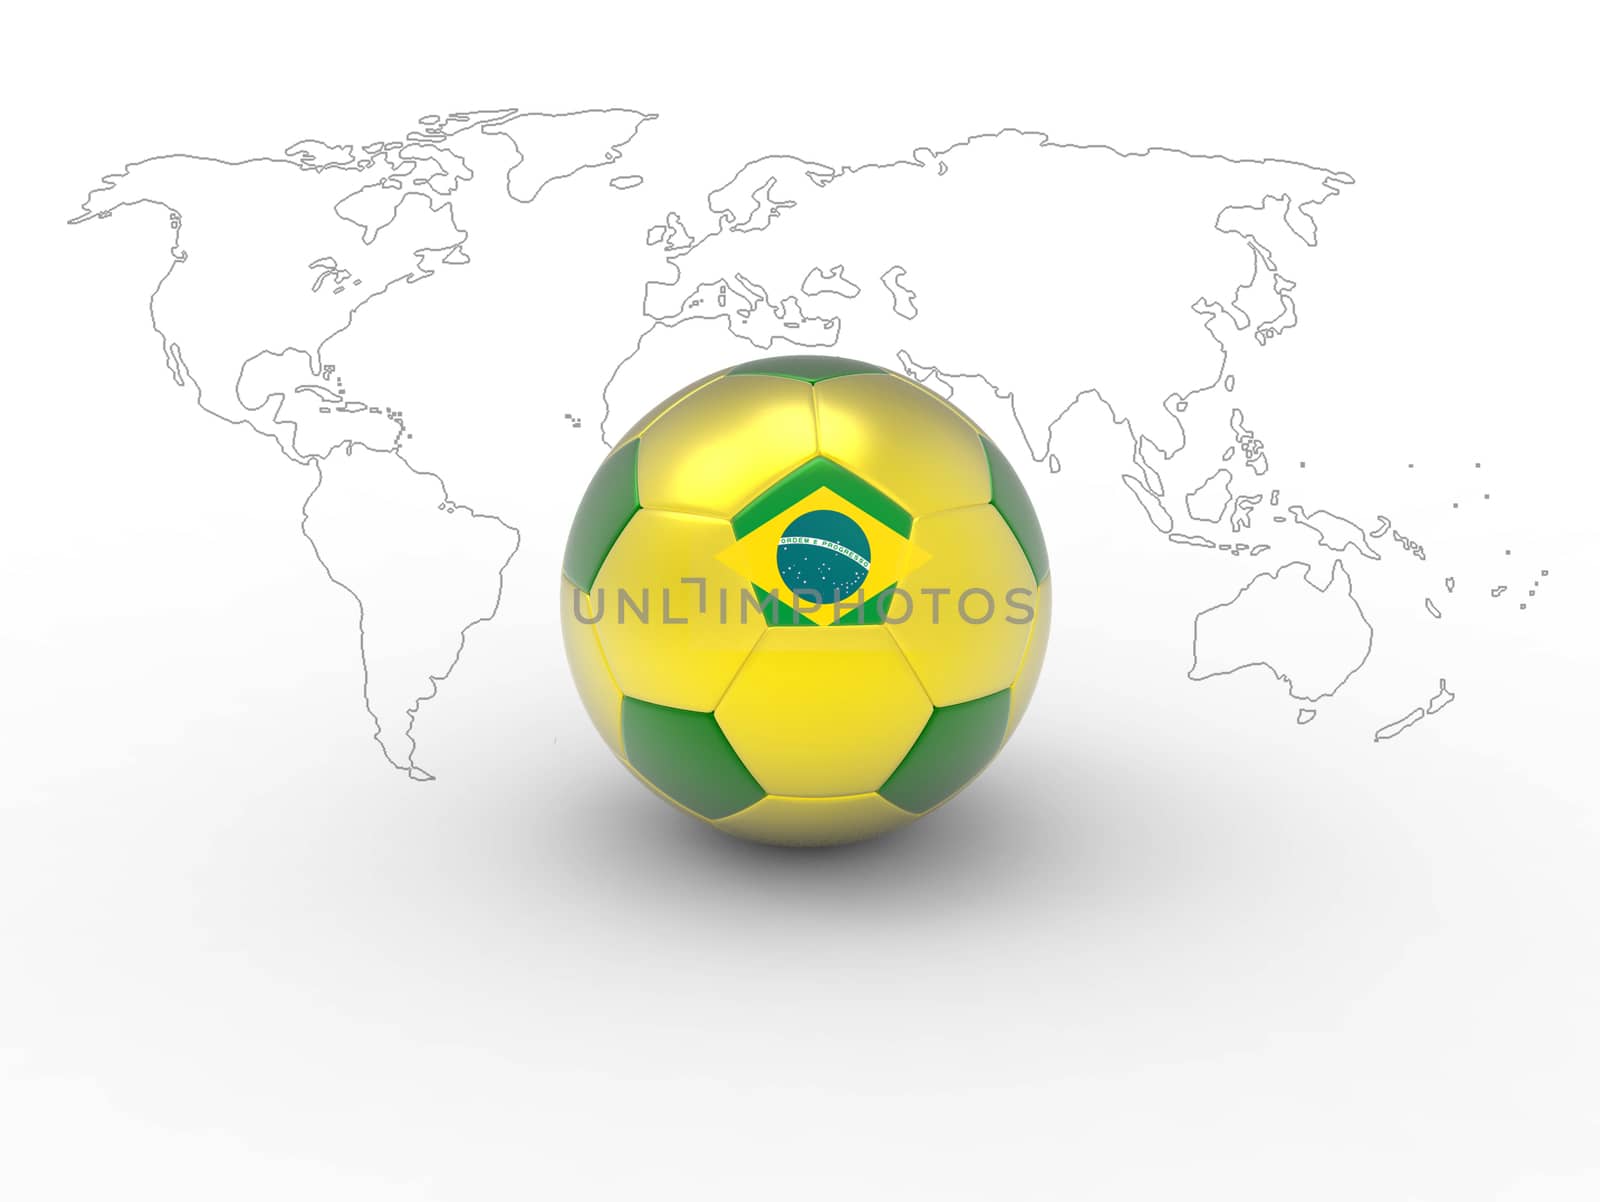 Isolated of soccer ball for sport equipment. Colorful ball for World Cup Brazil